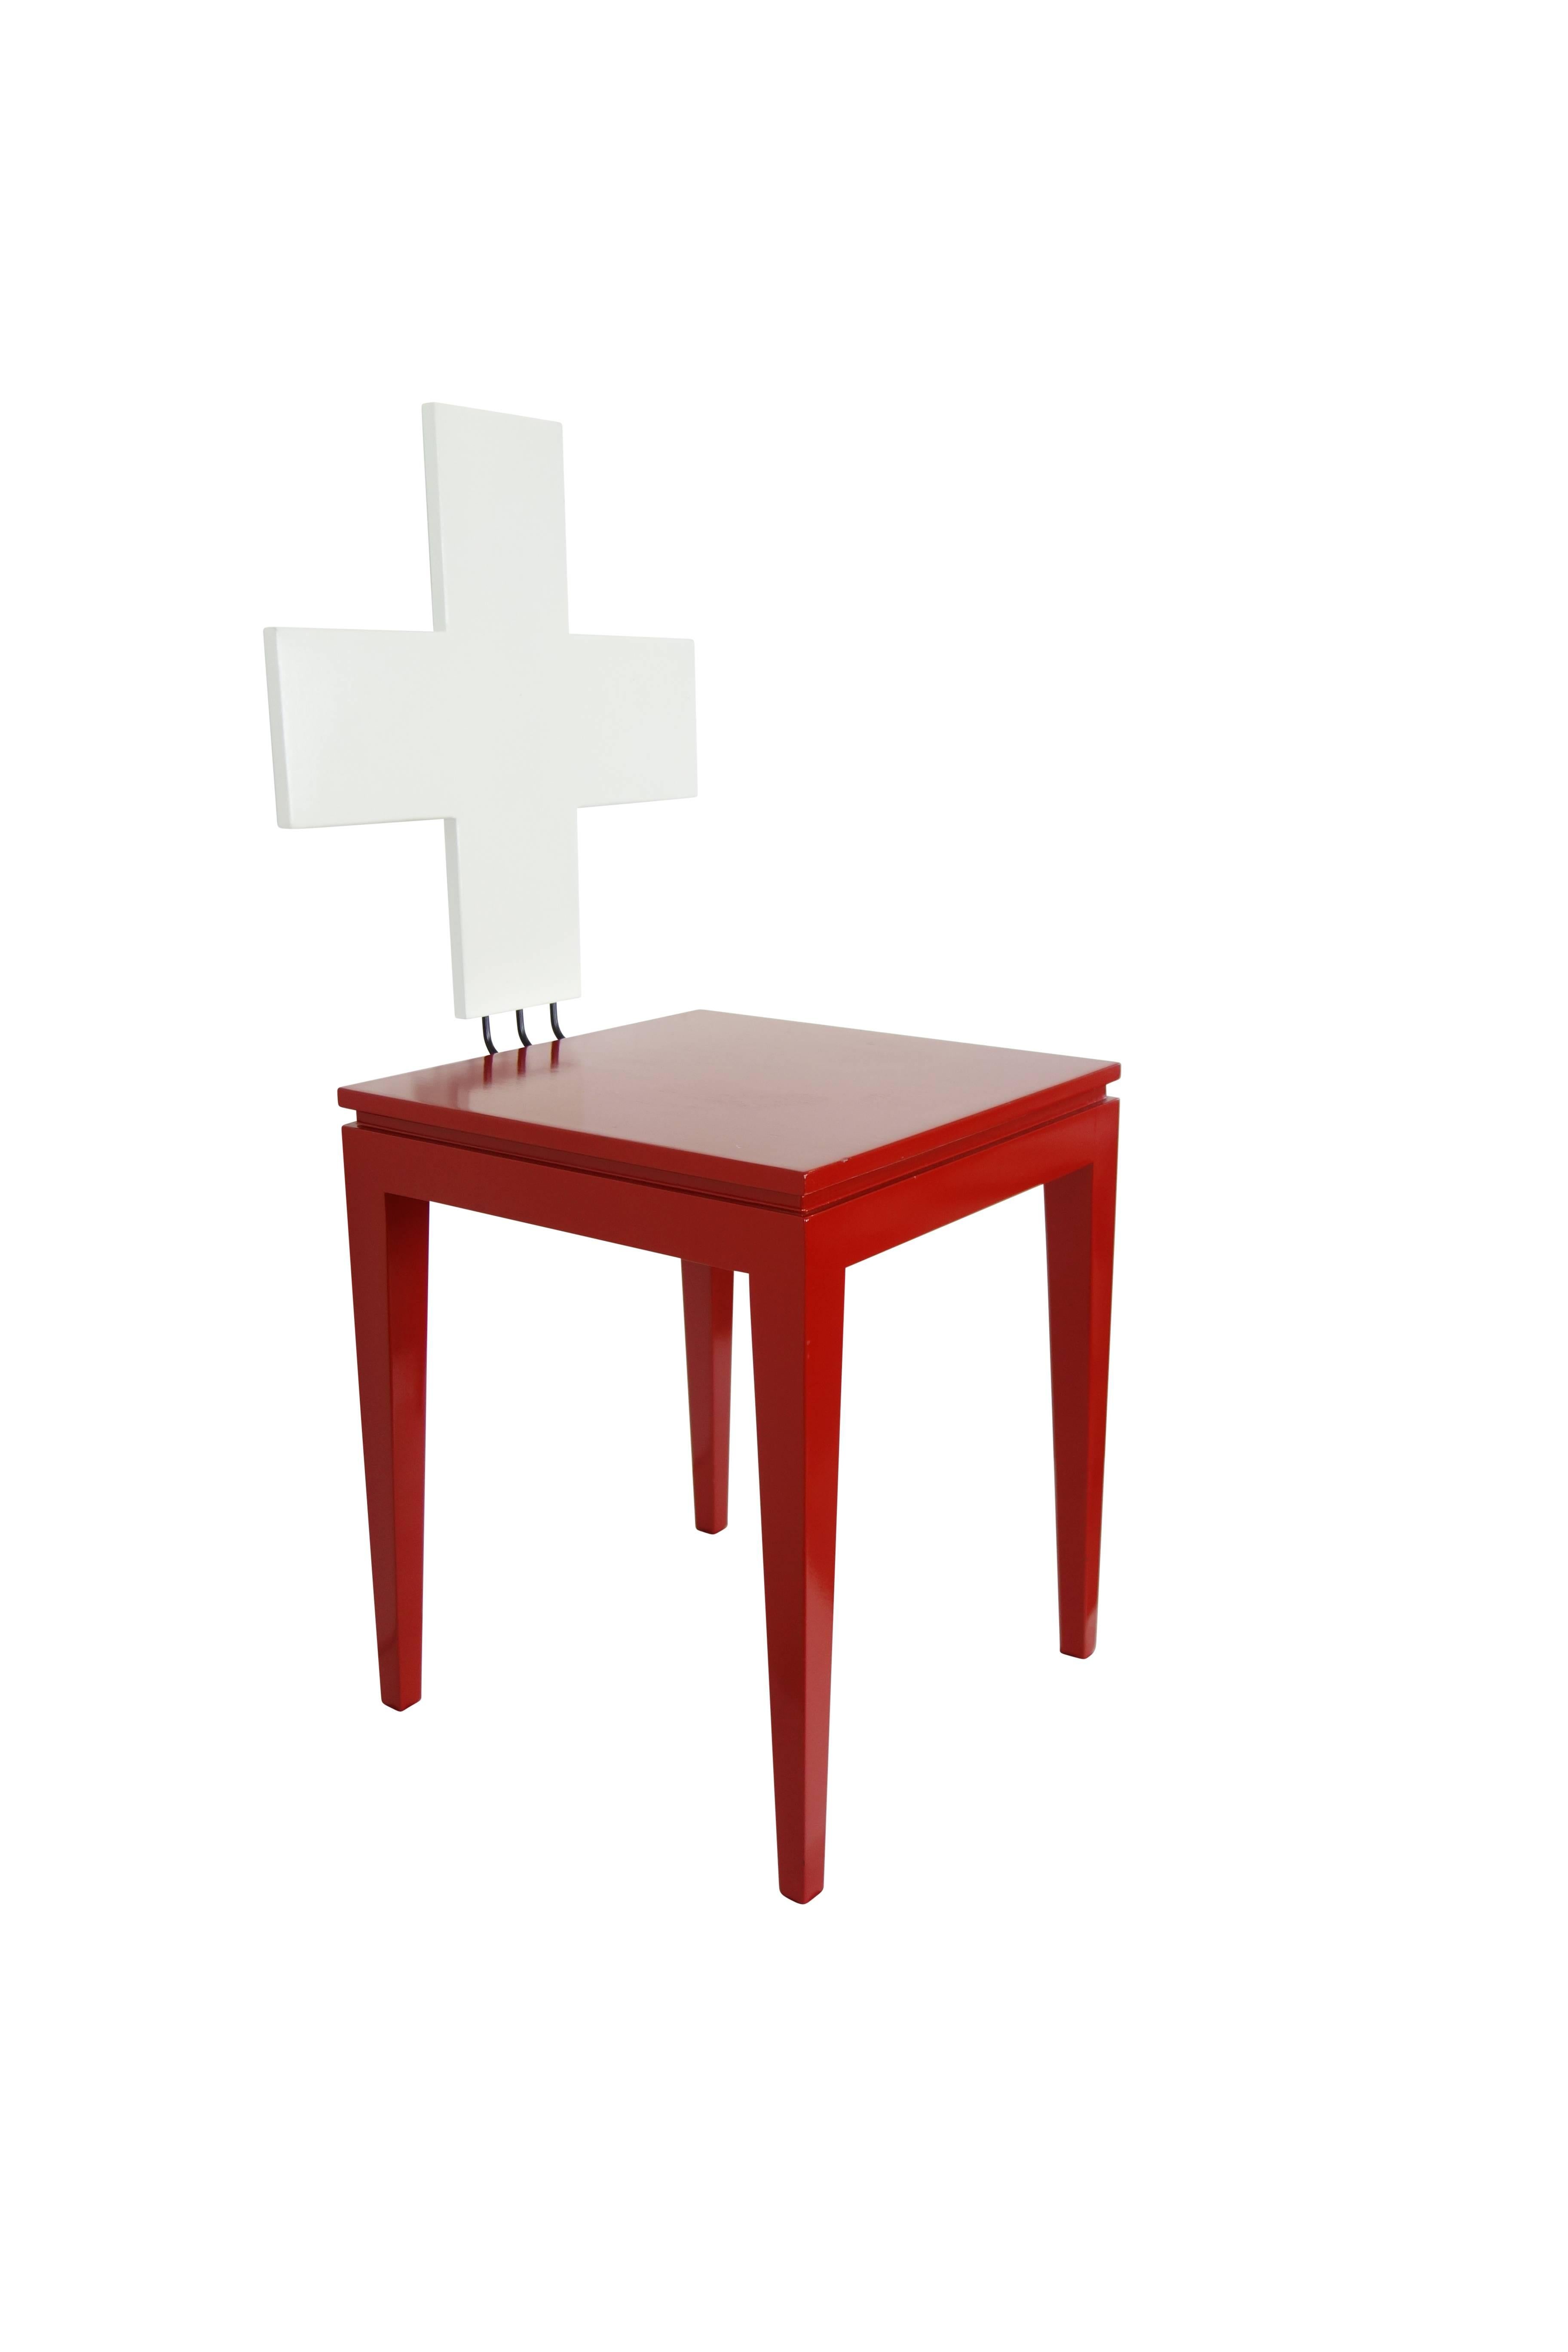 Swiss Red and White “Schwiiz” Chair Designed by Reto Kaufmann For Sale